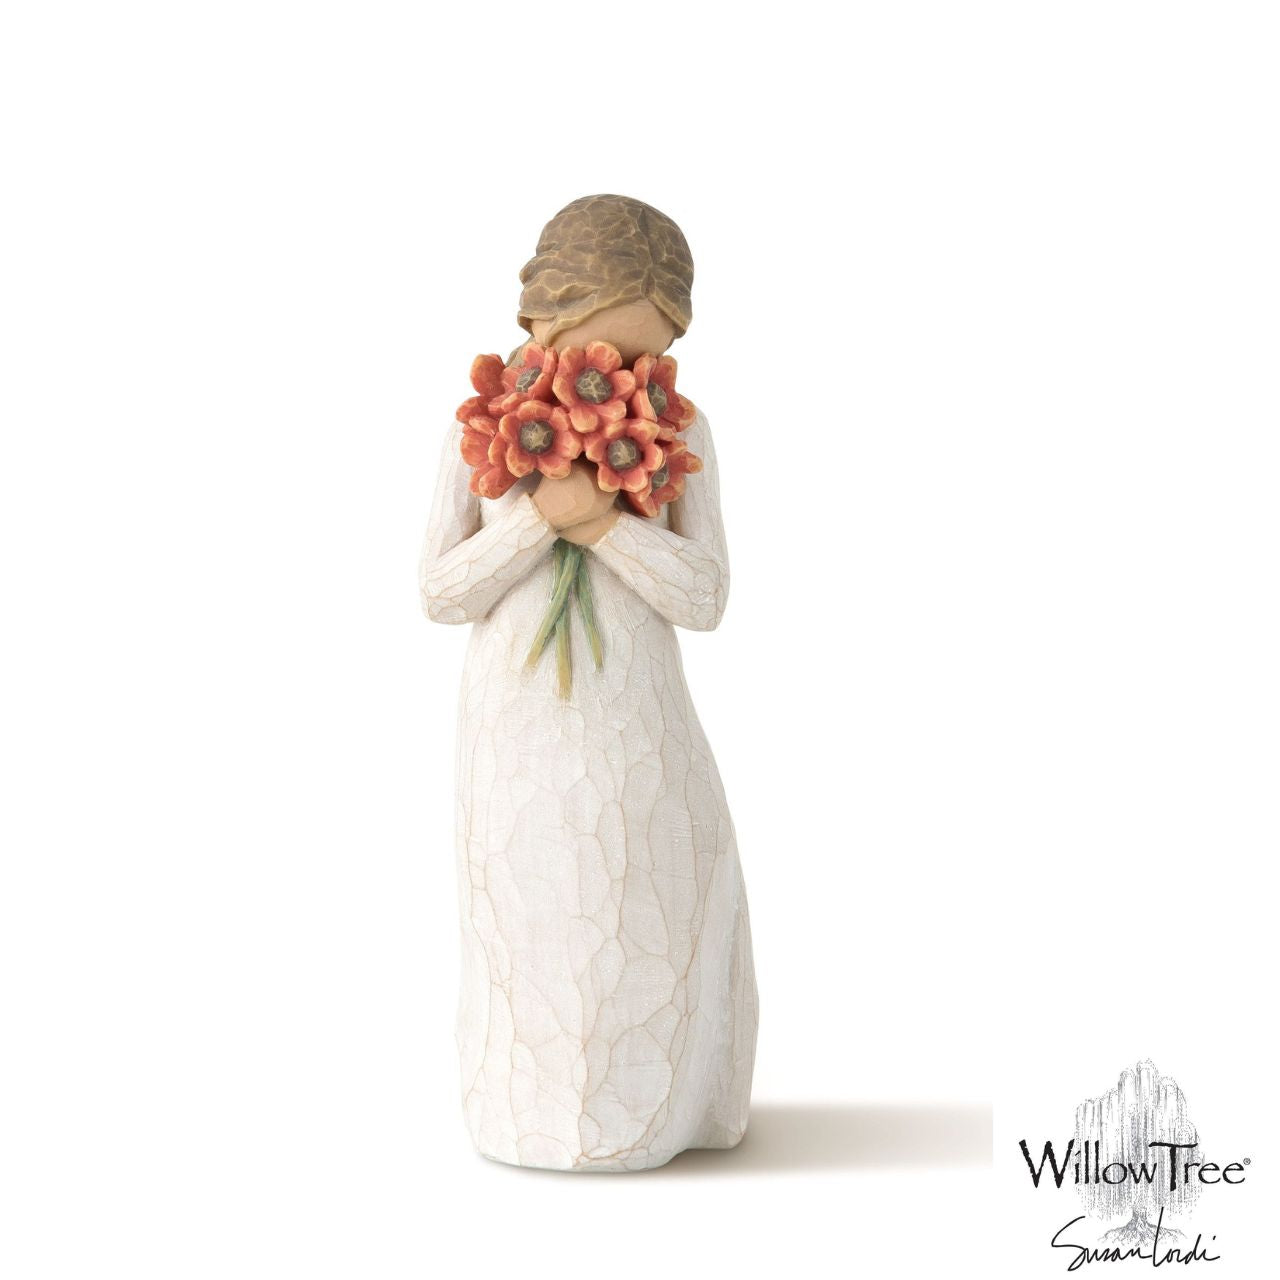 Willow Tree Surrounded by Love  A gift that expresses love and caring ...or for those who love flowers. "I wanted to make a figure with her face in the flowers, taking them in with her senses - smelling them, feeling the petals against her face; feeling safe in that surround.